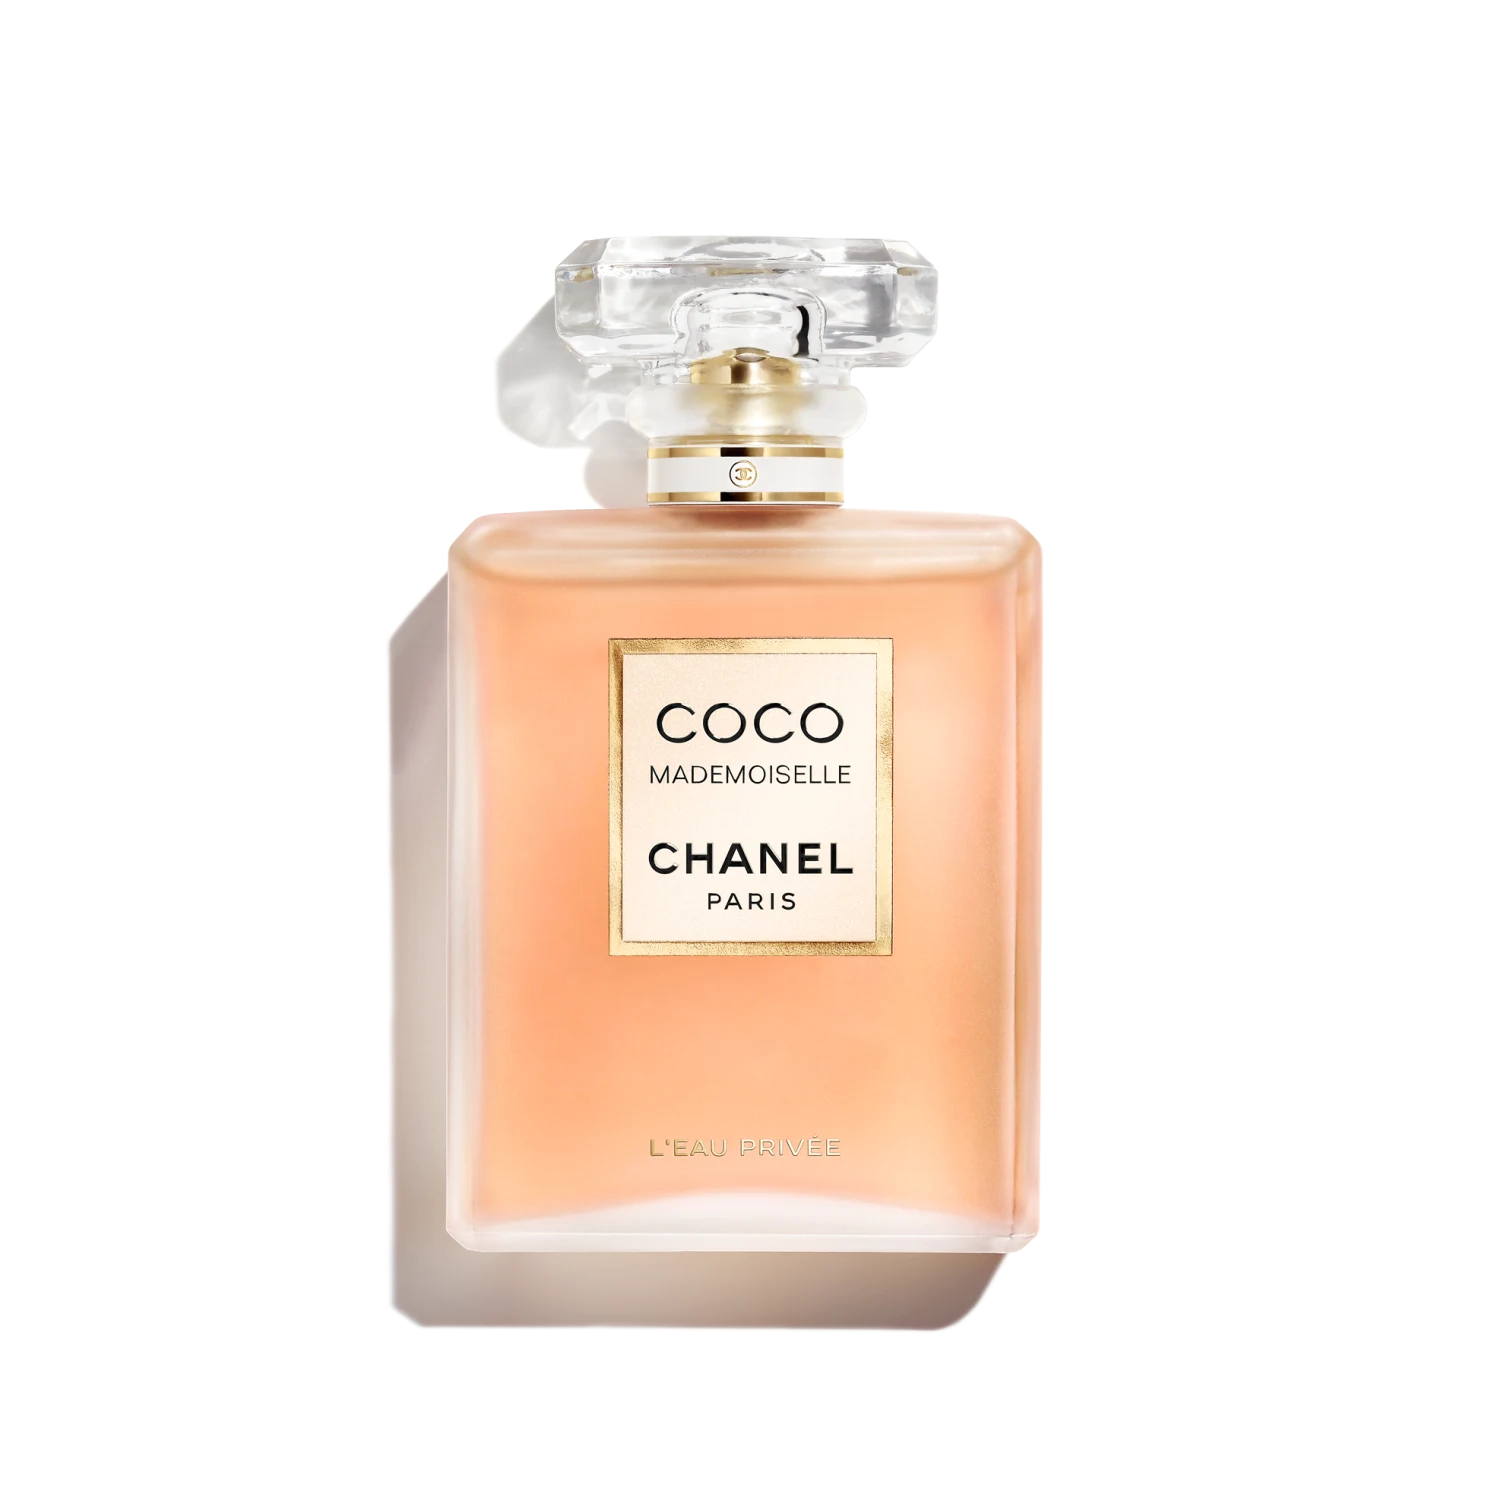 Вода парфюмерная Chanel Coco Mademoiselle L'Eau Privee женская, 100 мл the world according to coco the wit and wisdom of coco chanel